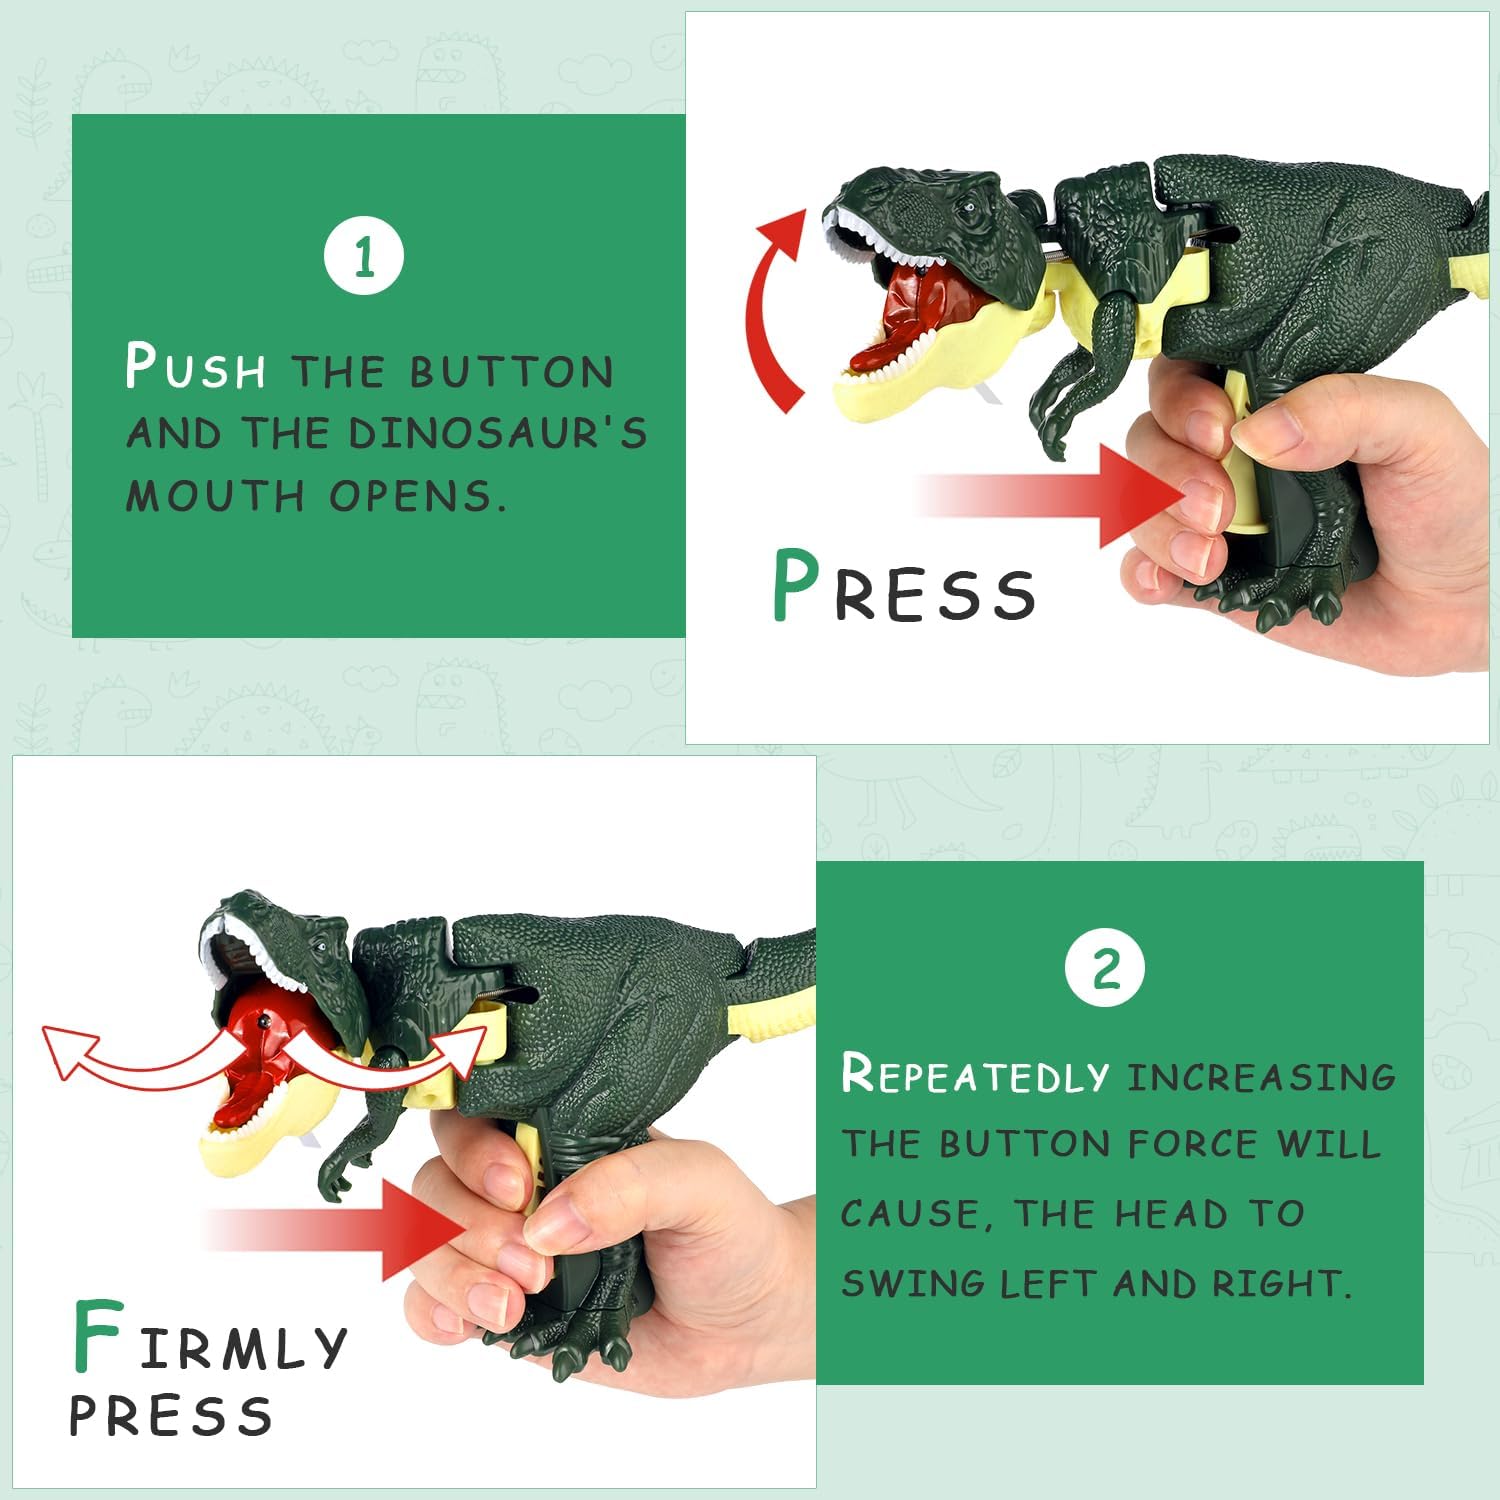 Funny Dinosaur Toy, Children Press The Tyrannosauru Model,Vibrating Head and Tail Moving Dinosaur,Tyrannosaurus T-Rex Walking Dinosaur